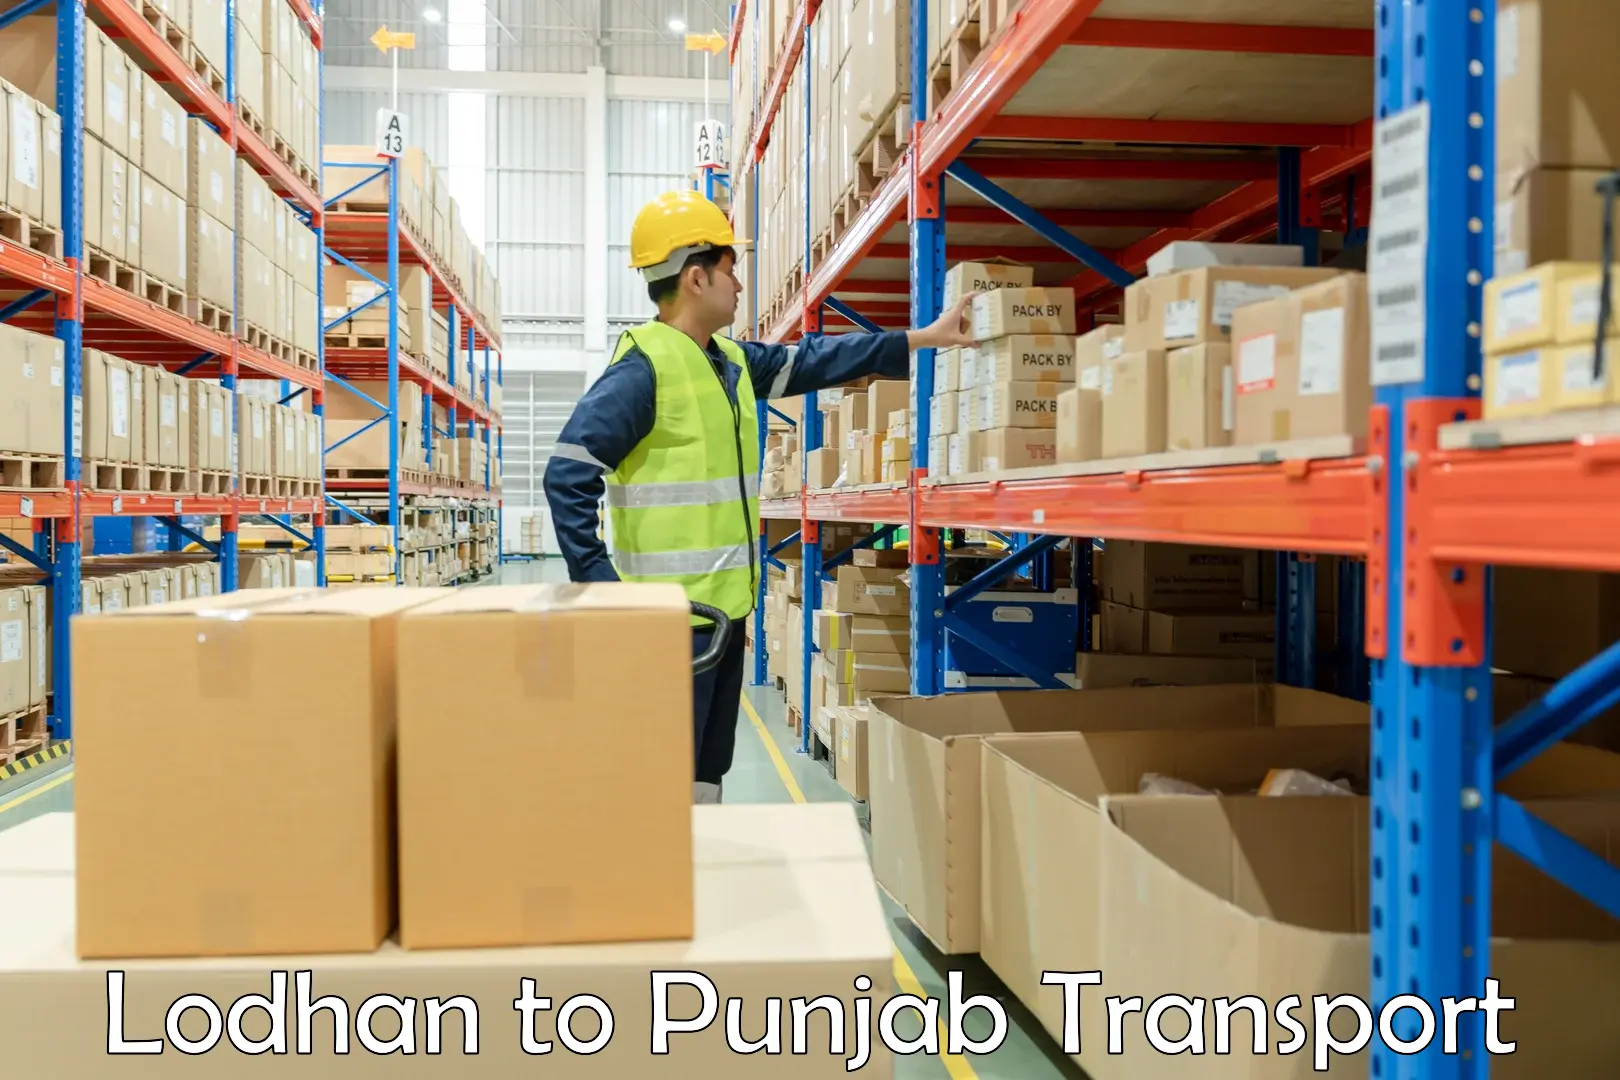 Air freight transport services Lodhan to Bagha Purana